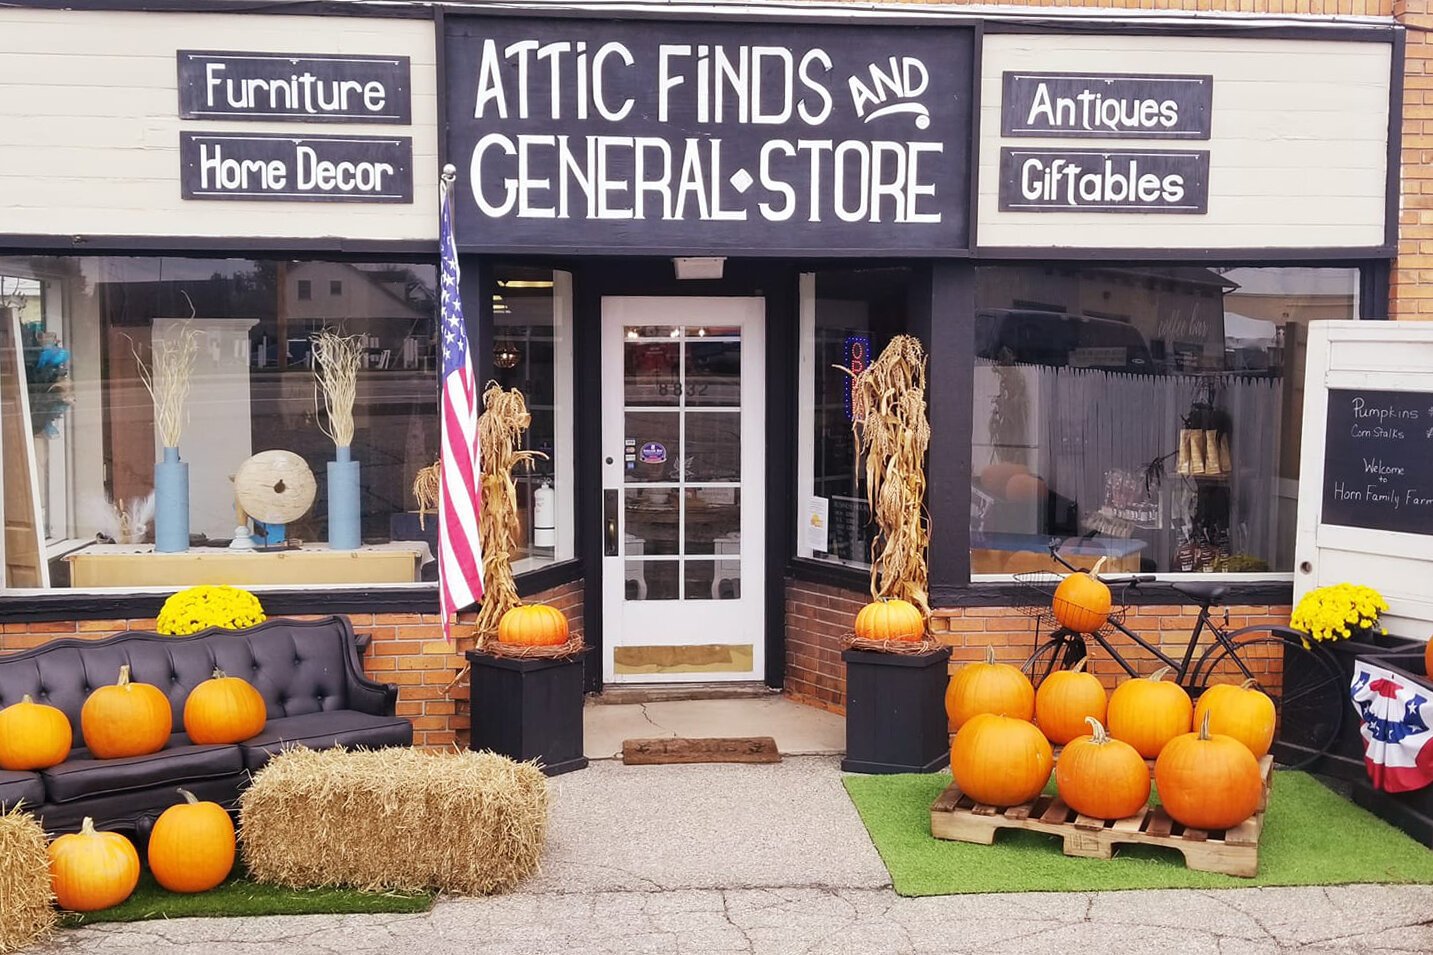 The Attic Finds is located off of Dixie Highway in Fair Haven, Michigan.